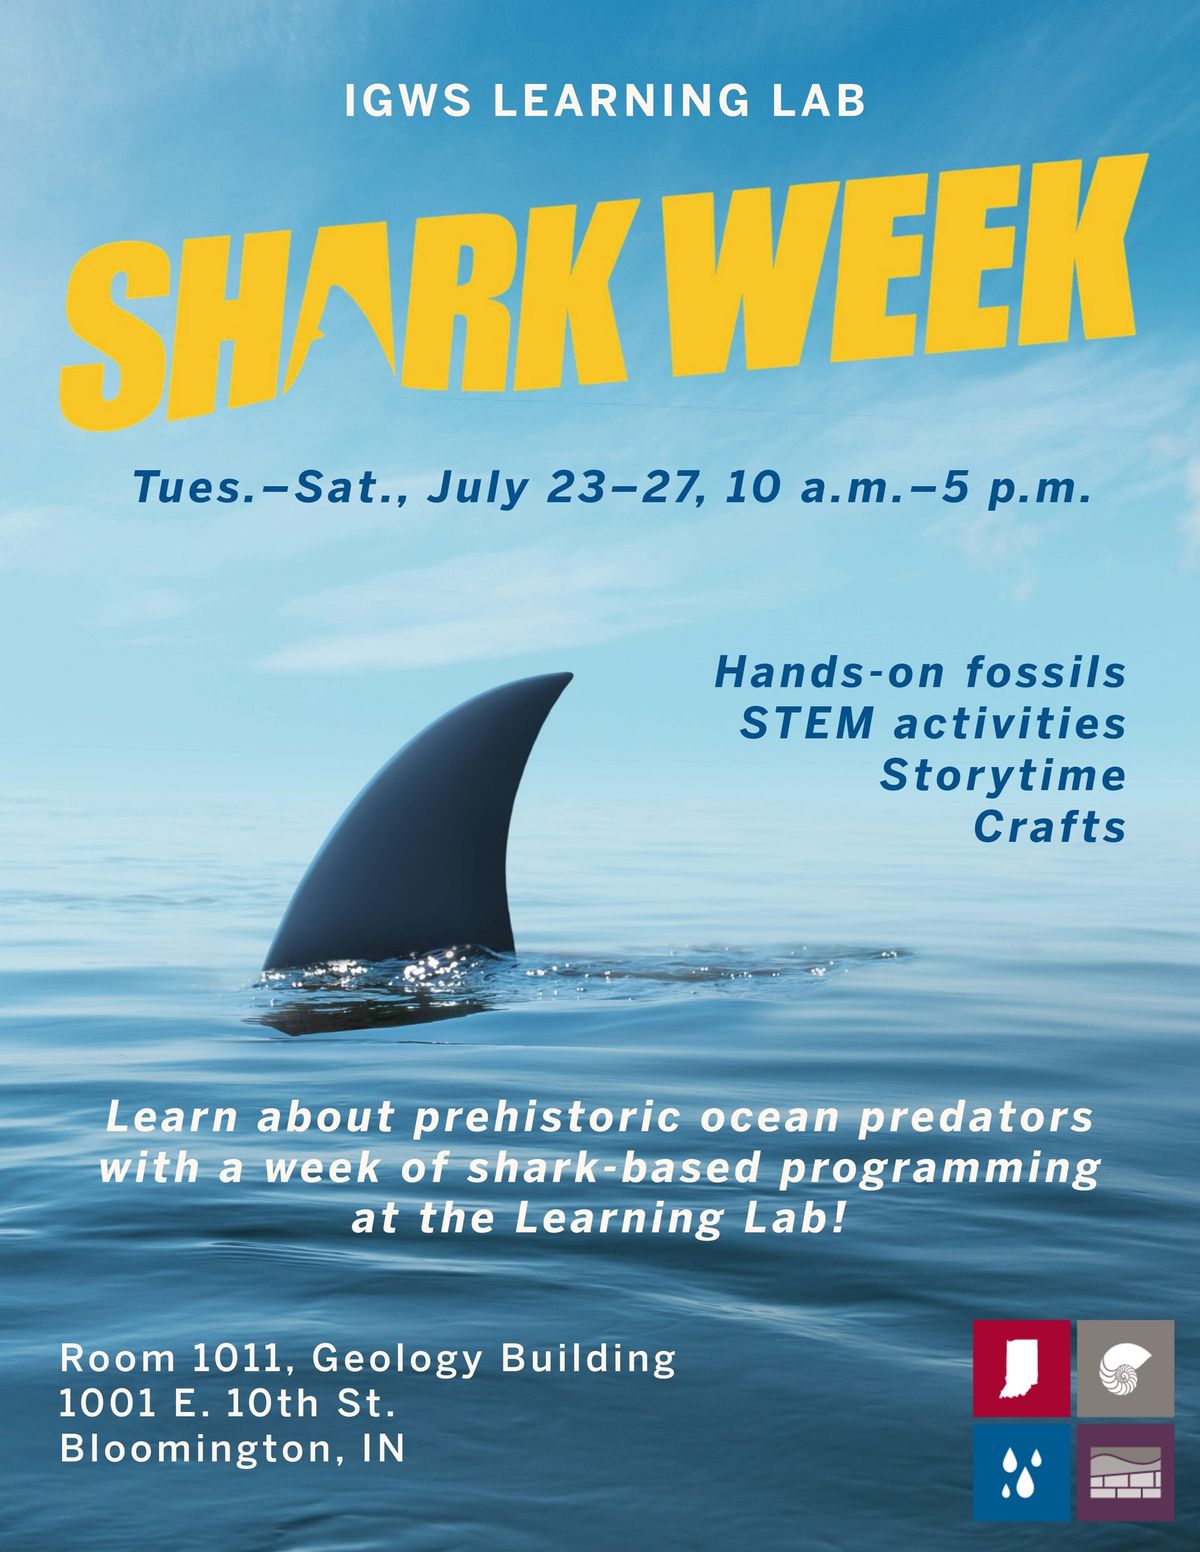 Shark Week at the Learning Lab